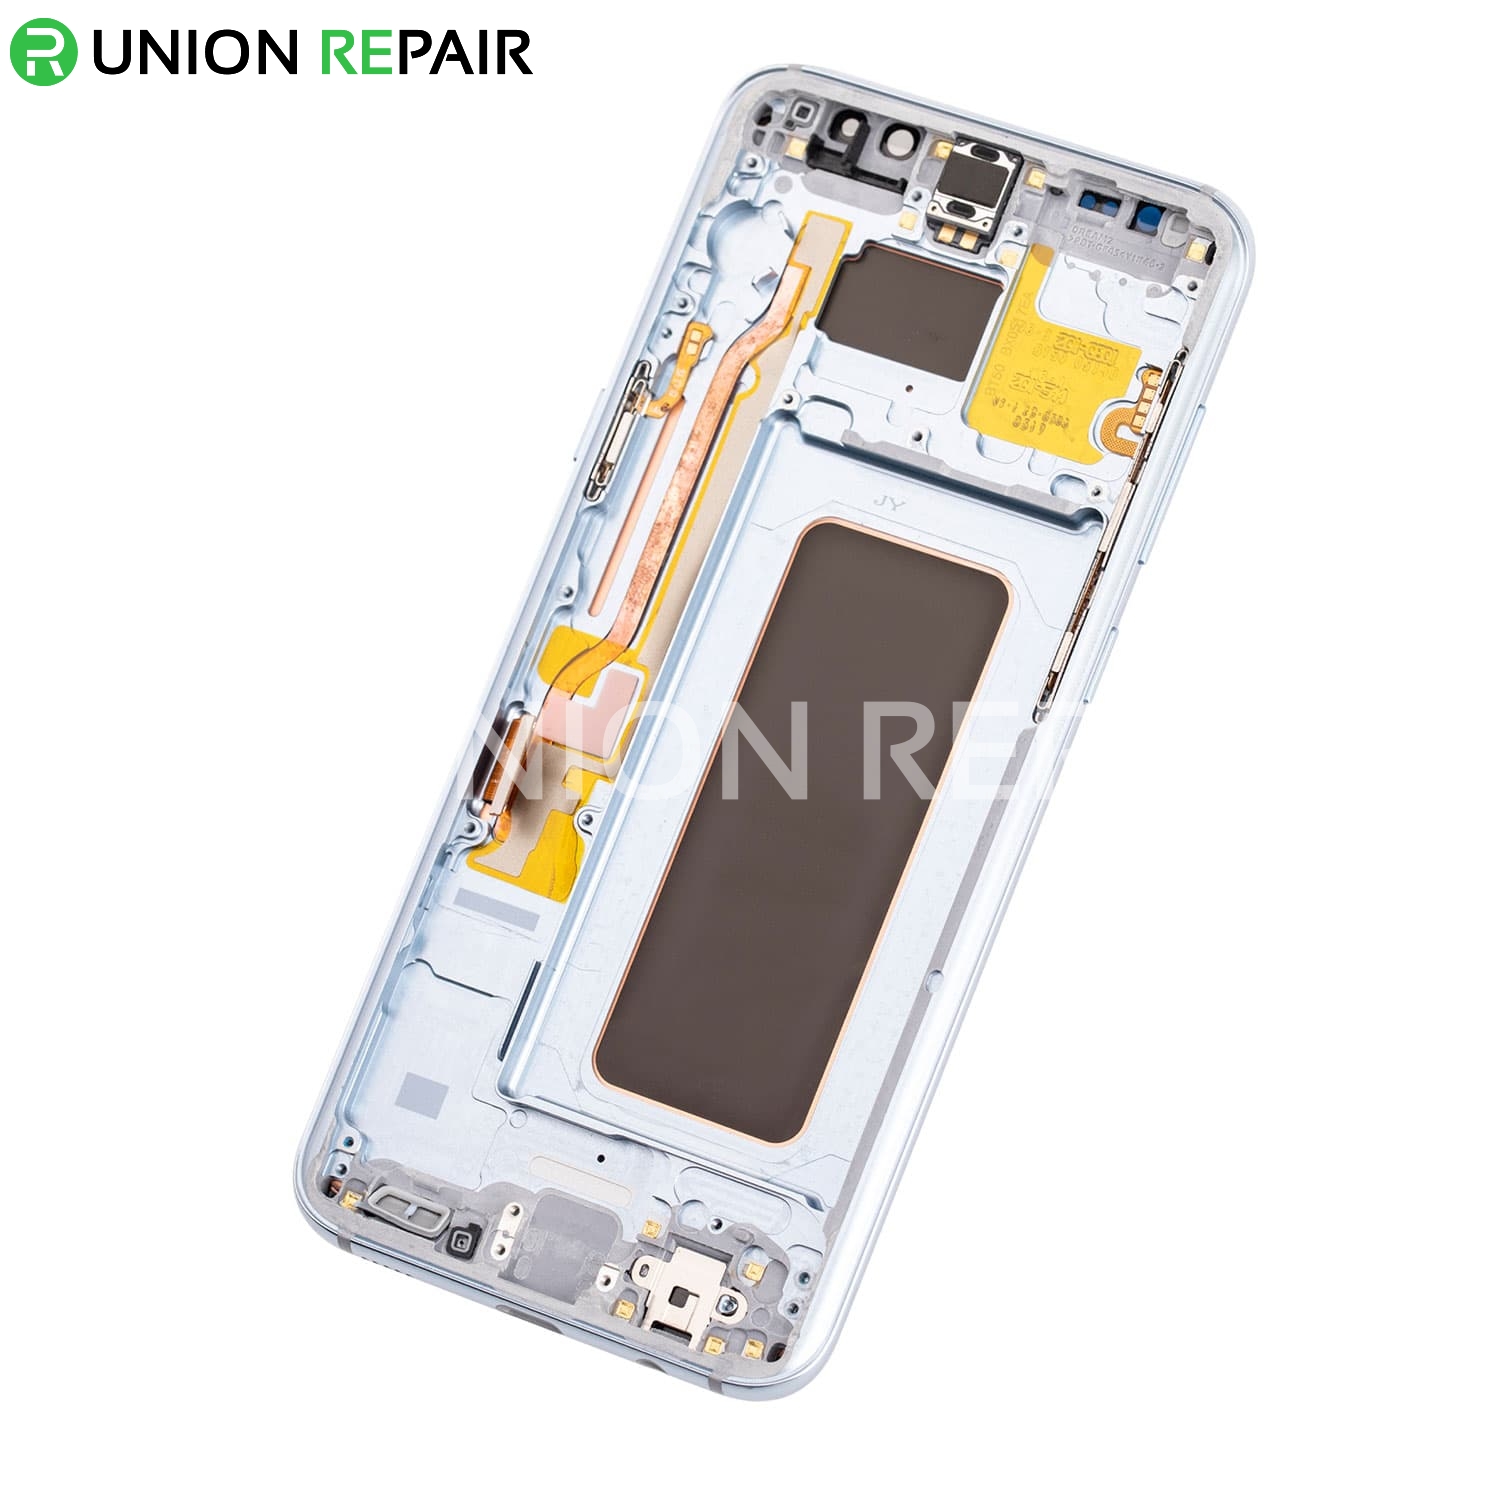 Replacement for Samsung Galaxy S8 Plus SM-G955 LCD Screen Assembly - Coral Blue